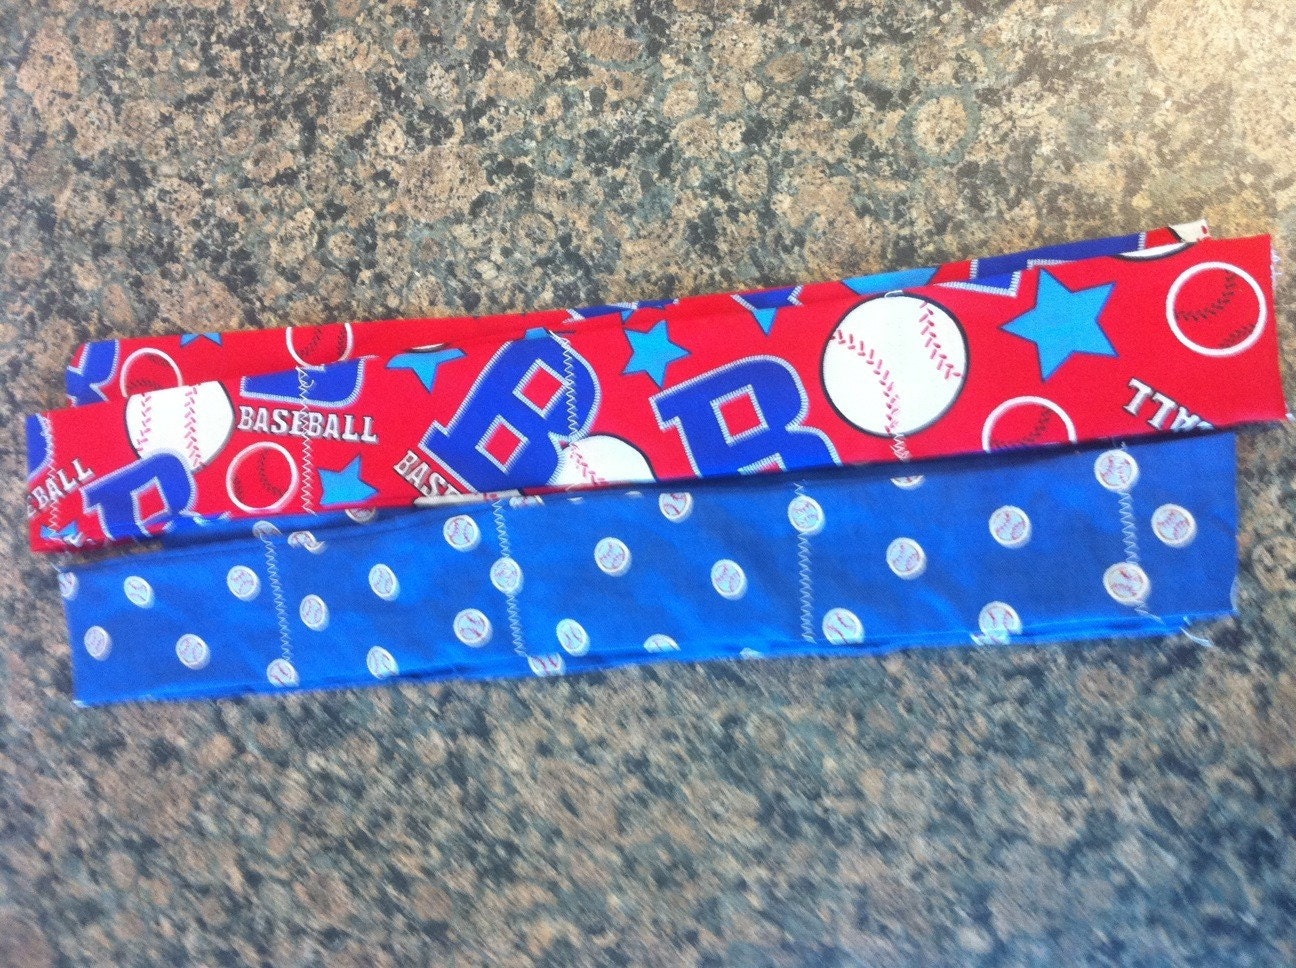 Lot of 2 Baseball cool neck bands to benefit American Cancer Society